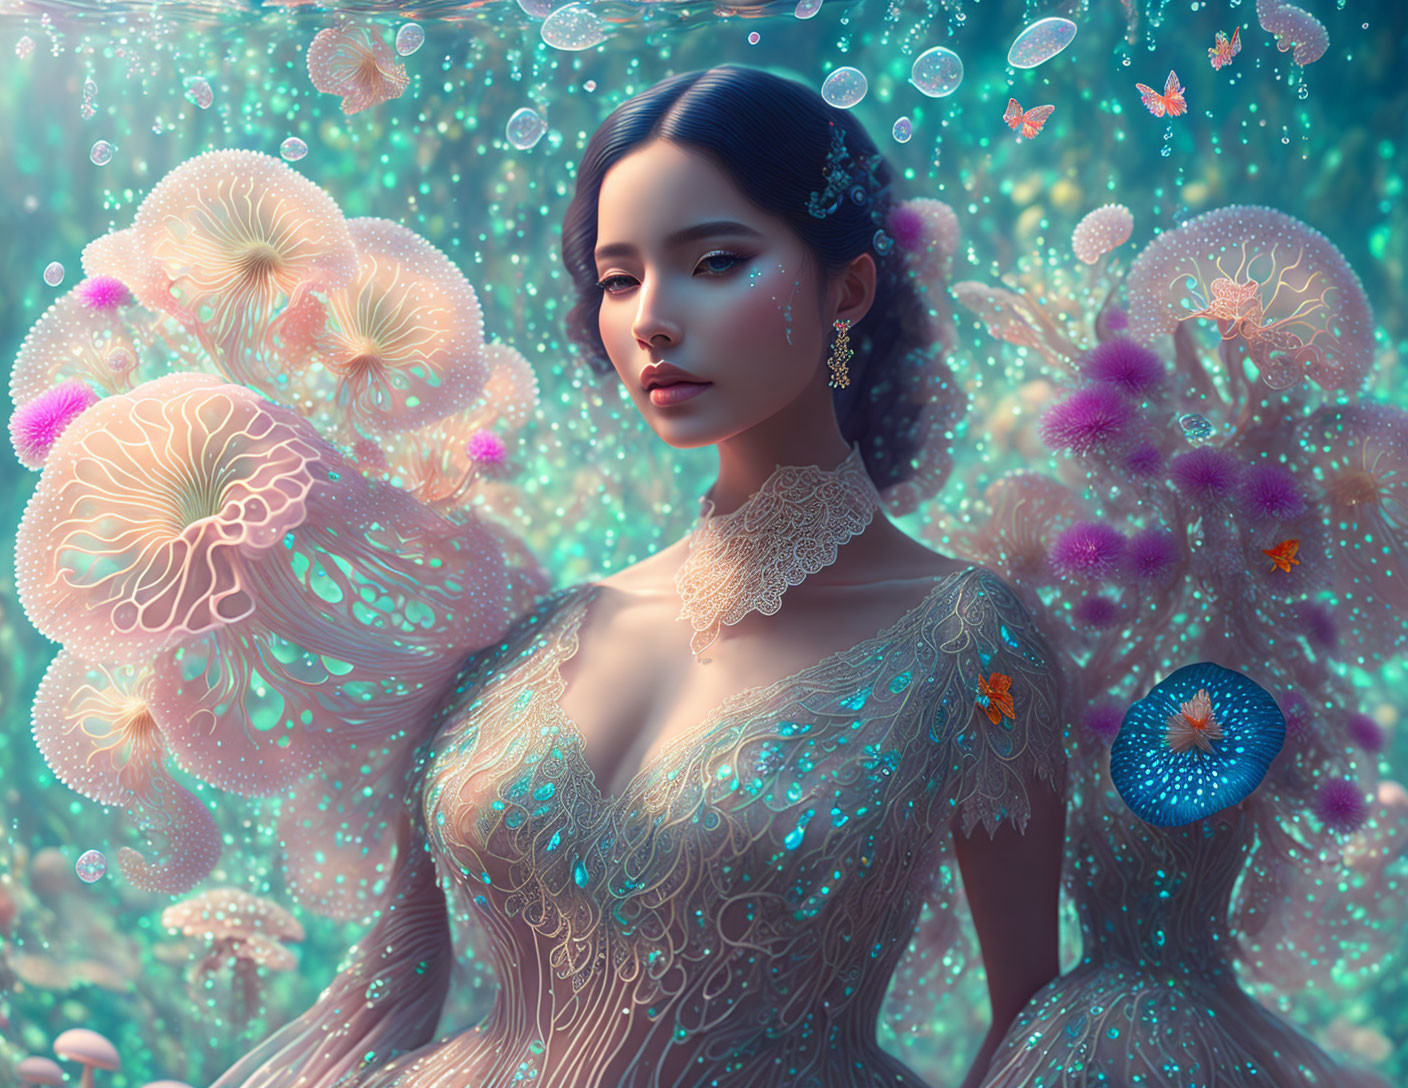 Ethereal woman with glowing jellyfish in underwater fantasy scene